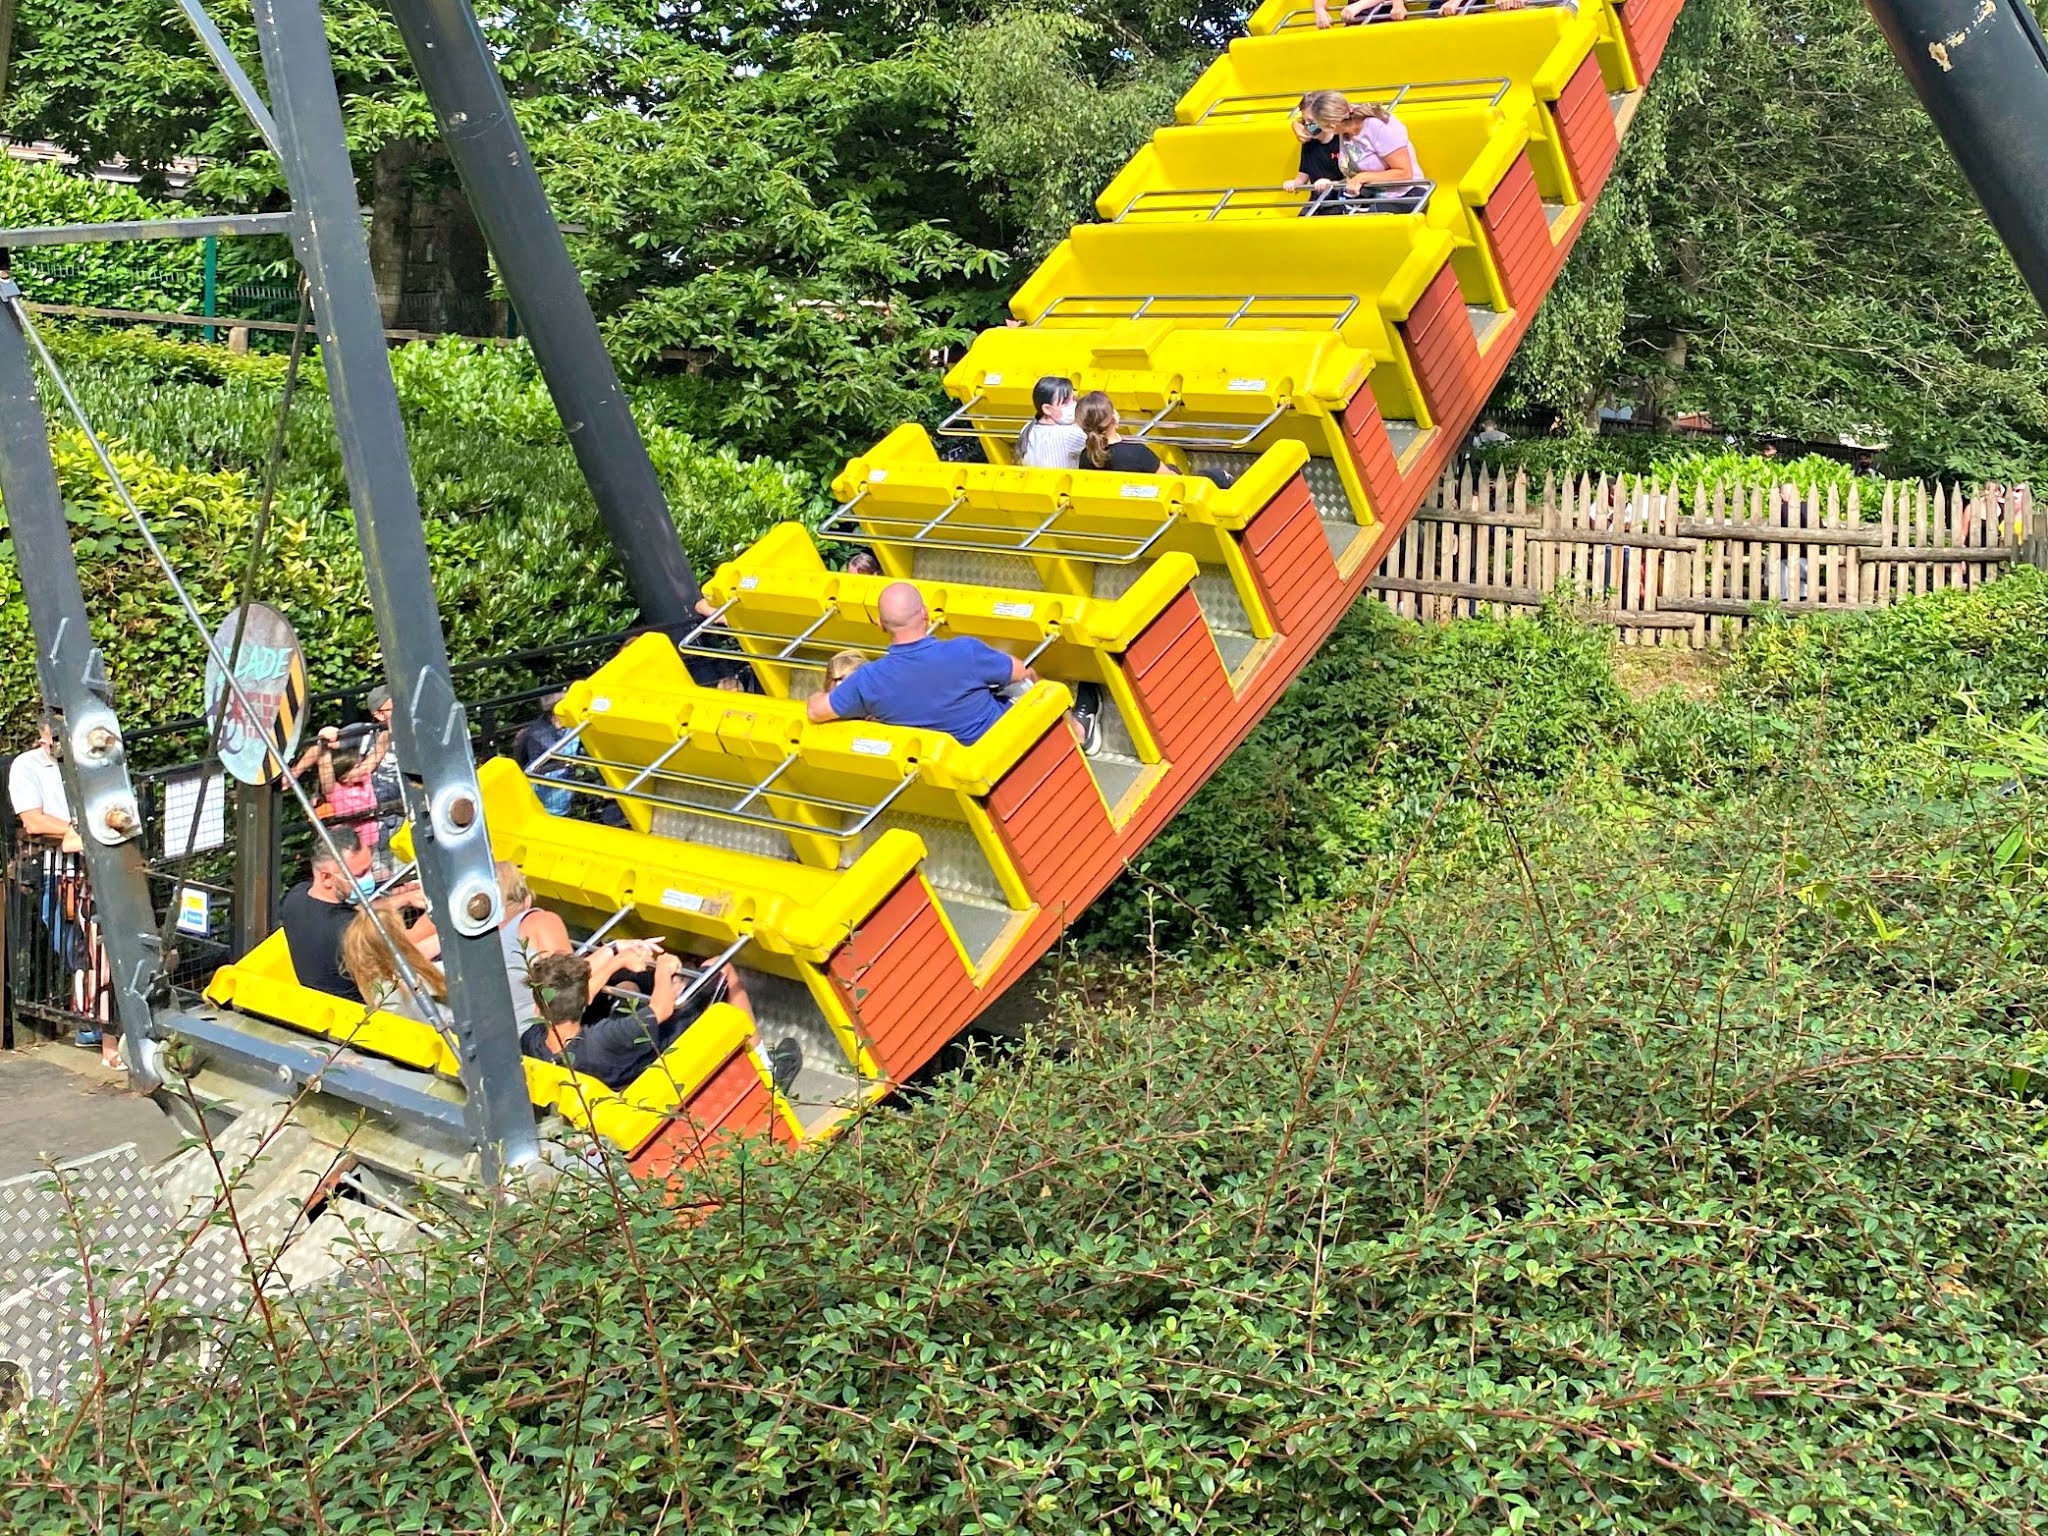 The Blade ride at Alton Towers